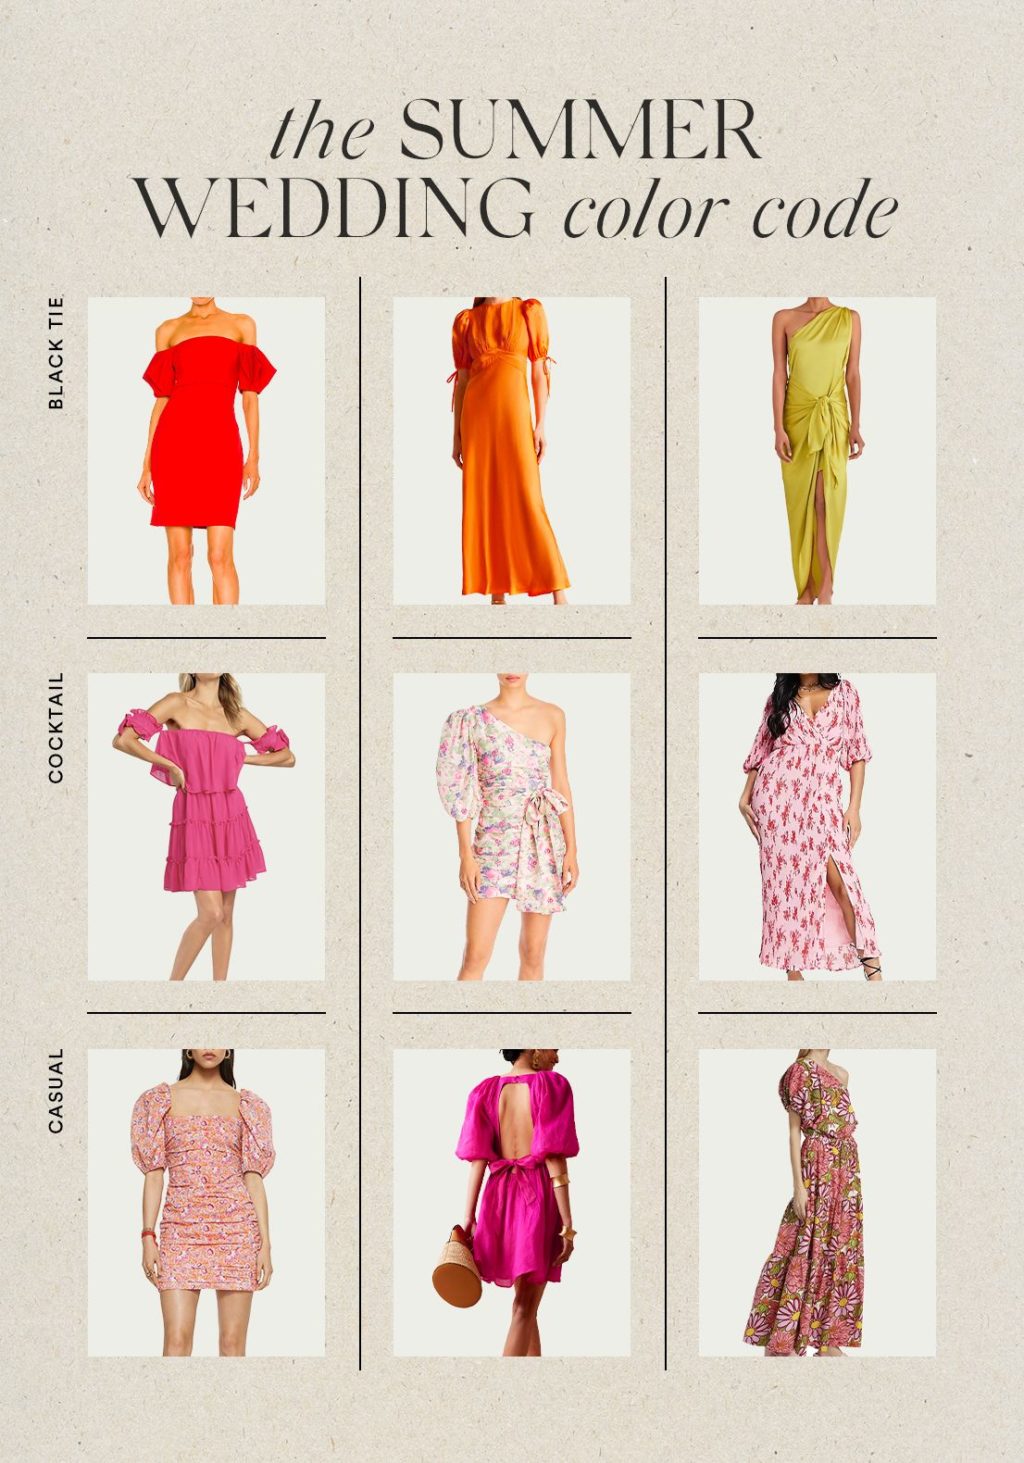 The Summer Wedding Color Code